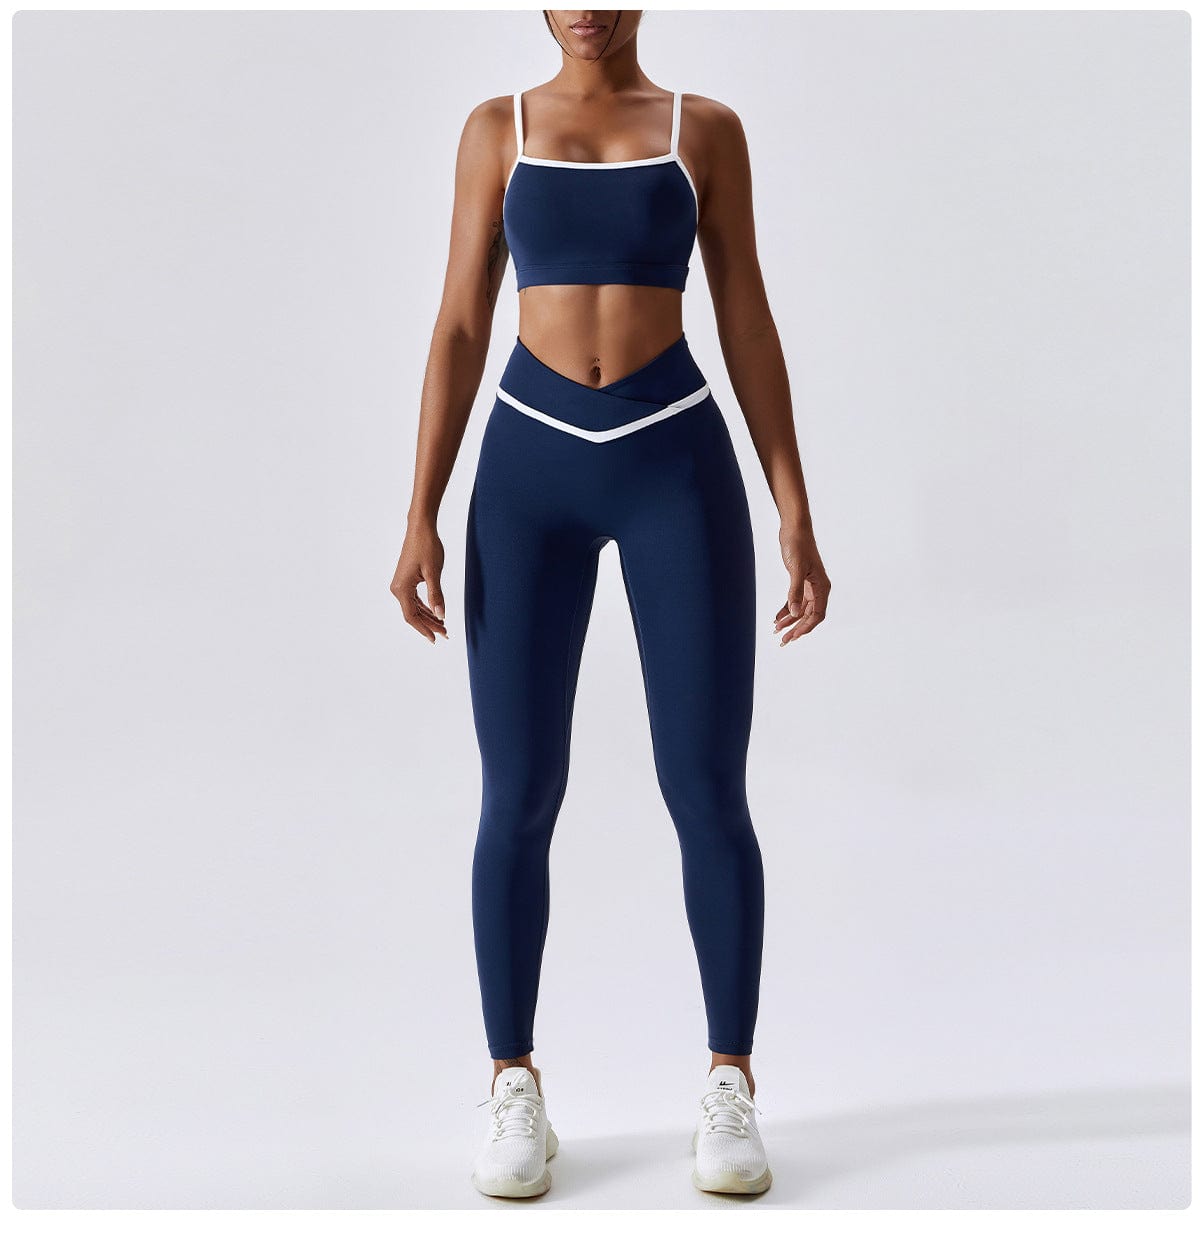 Outlined Curves Workout Set – SqueezMeSkinny